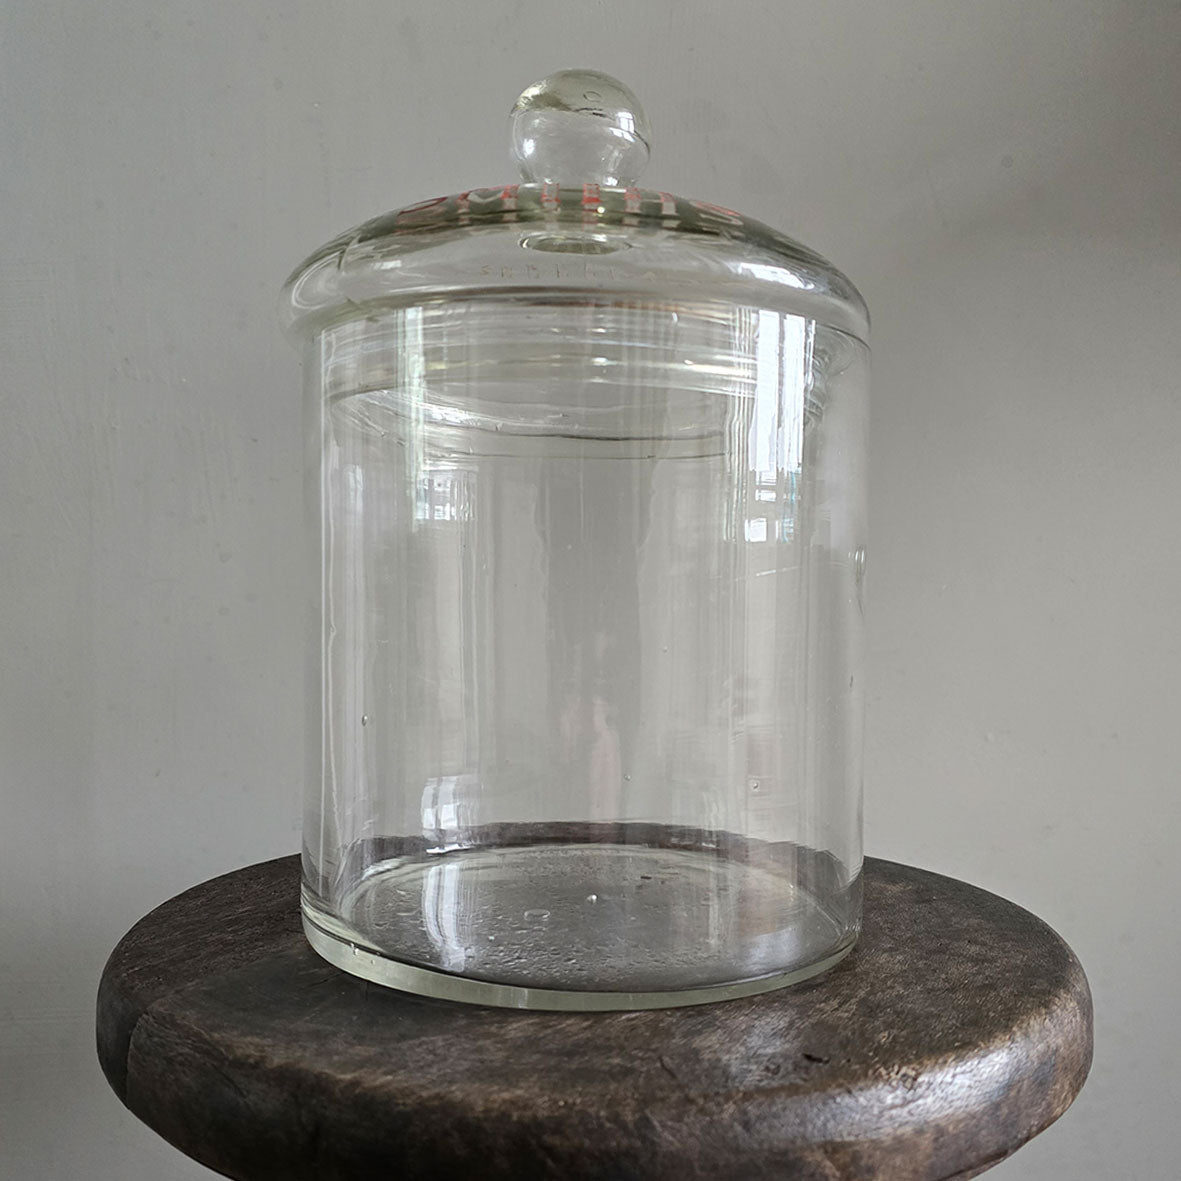 A Vintage Smith's Crisps Shop Jar An original shop glass storage jar, Circa 1920’s. Some of the lettering has worn away on the lid, but still makes a very attractive, vintage storage jar for use, or display - SHOP NOW - www.intovintage.co.uk